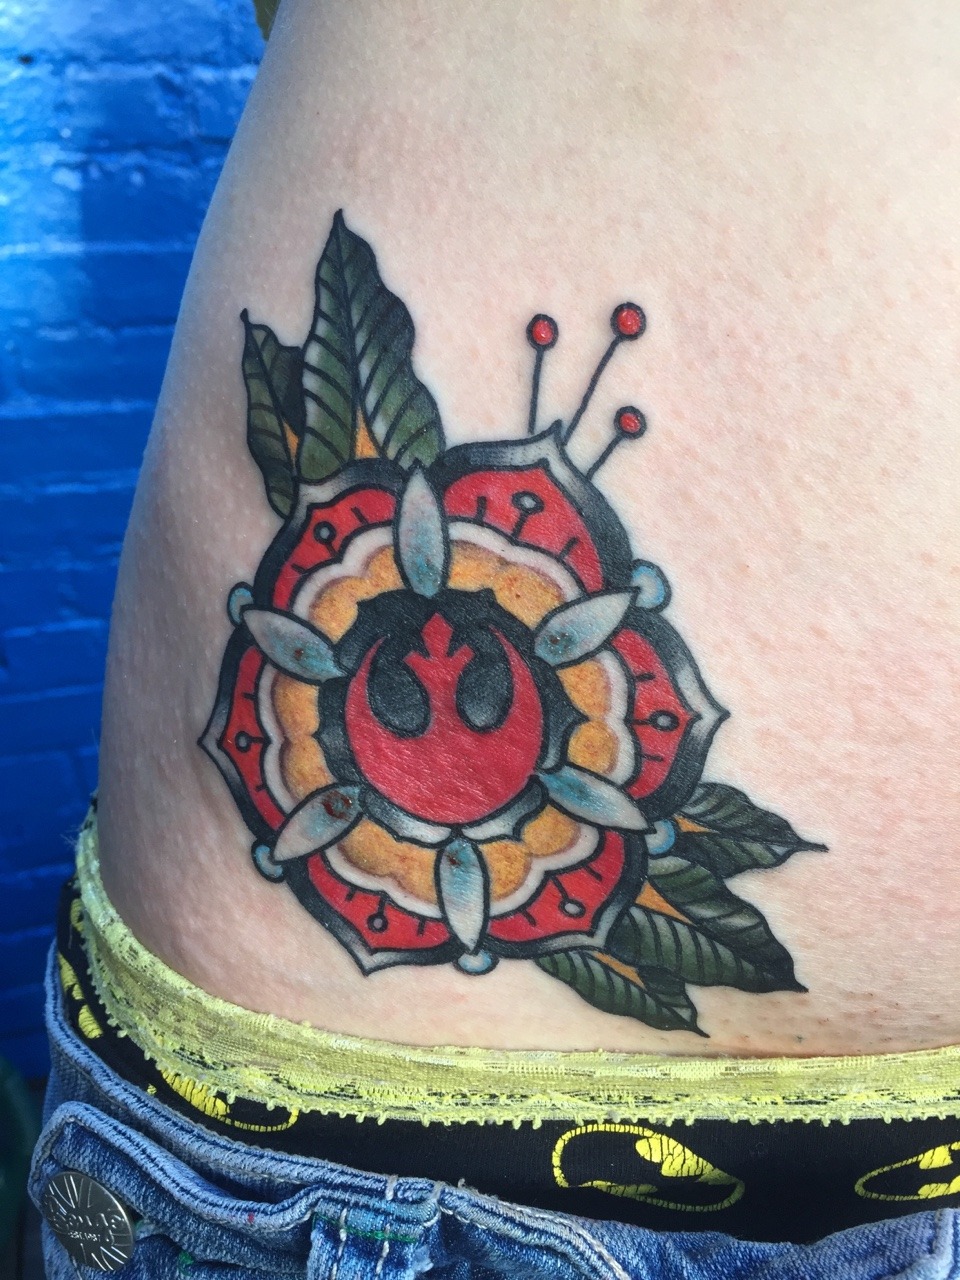 Rebel Alliance by Ron Goulet : Tattoos